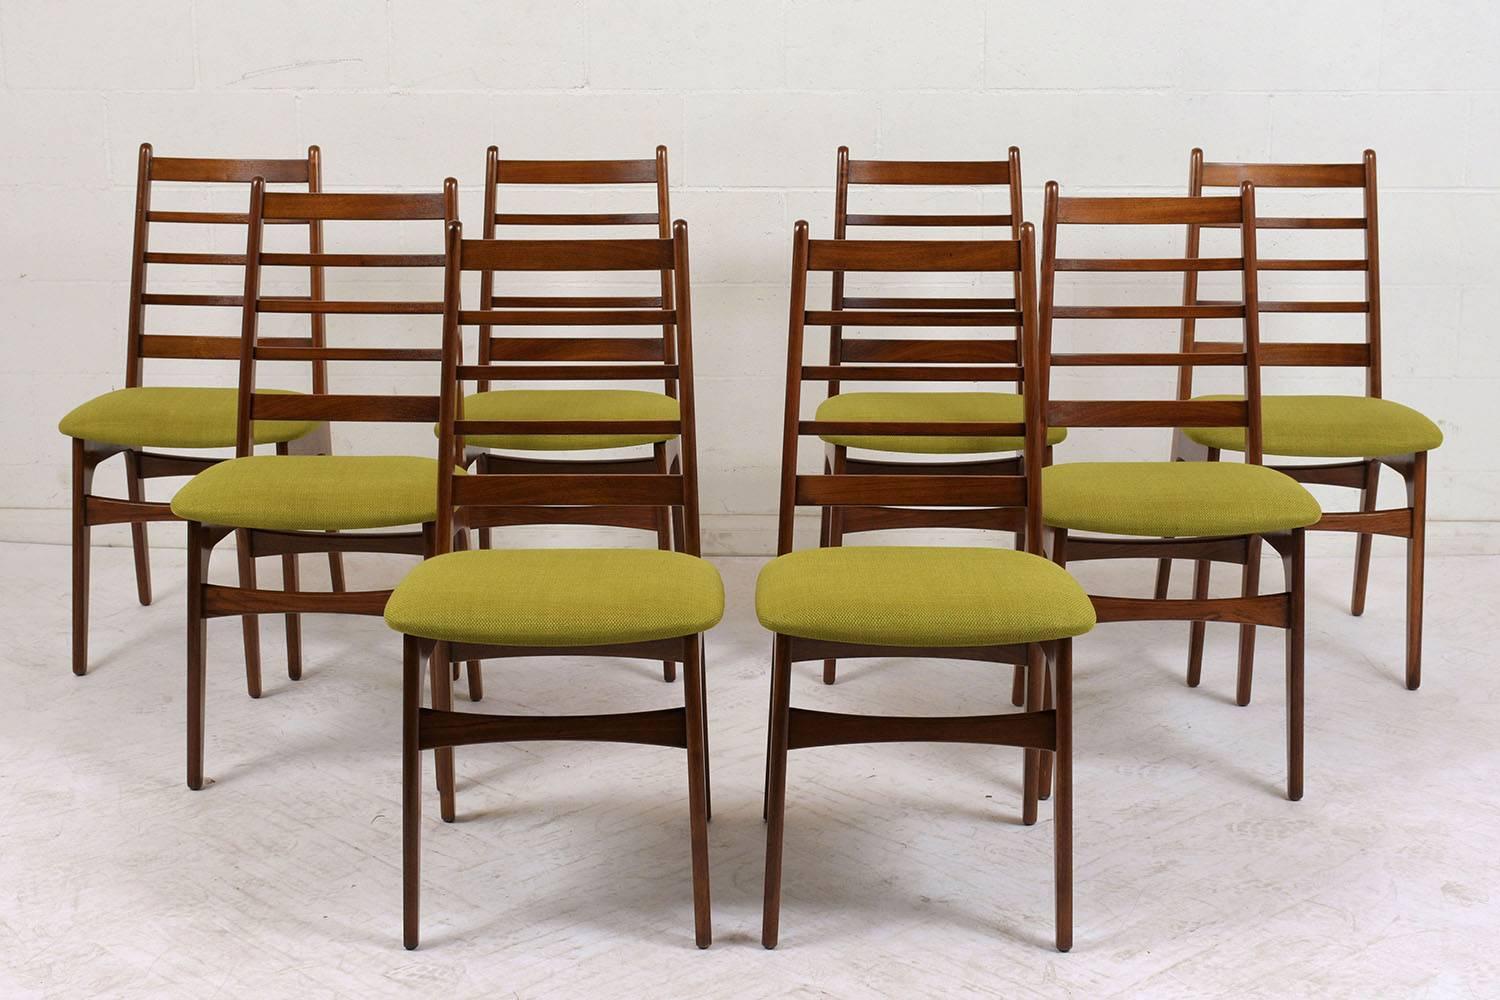 This Set of Eight 1960's Danish Mid-Century Modern Dining Chairs have been completely restored, made out of solid teak wood and has a newly lacquered finish. The chairs feature a high back profile with a ladder design and have been newly upholstered